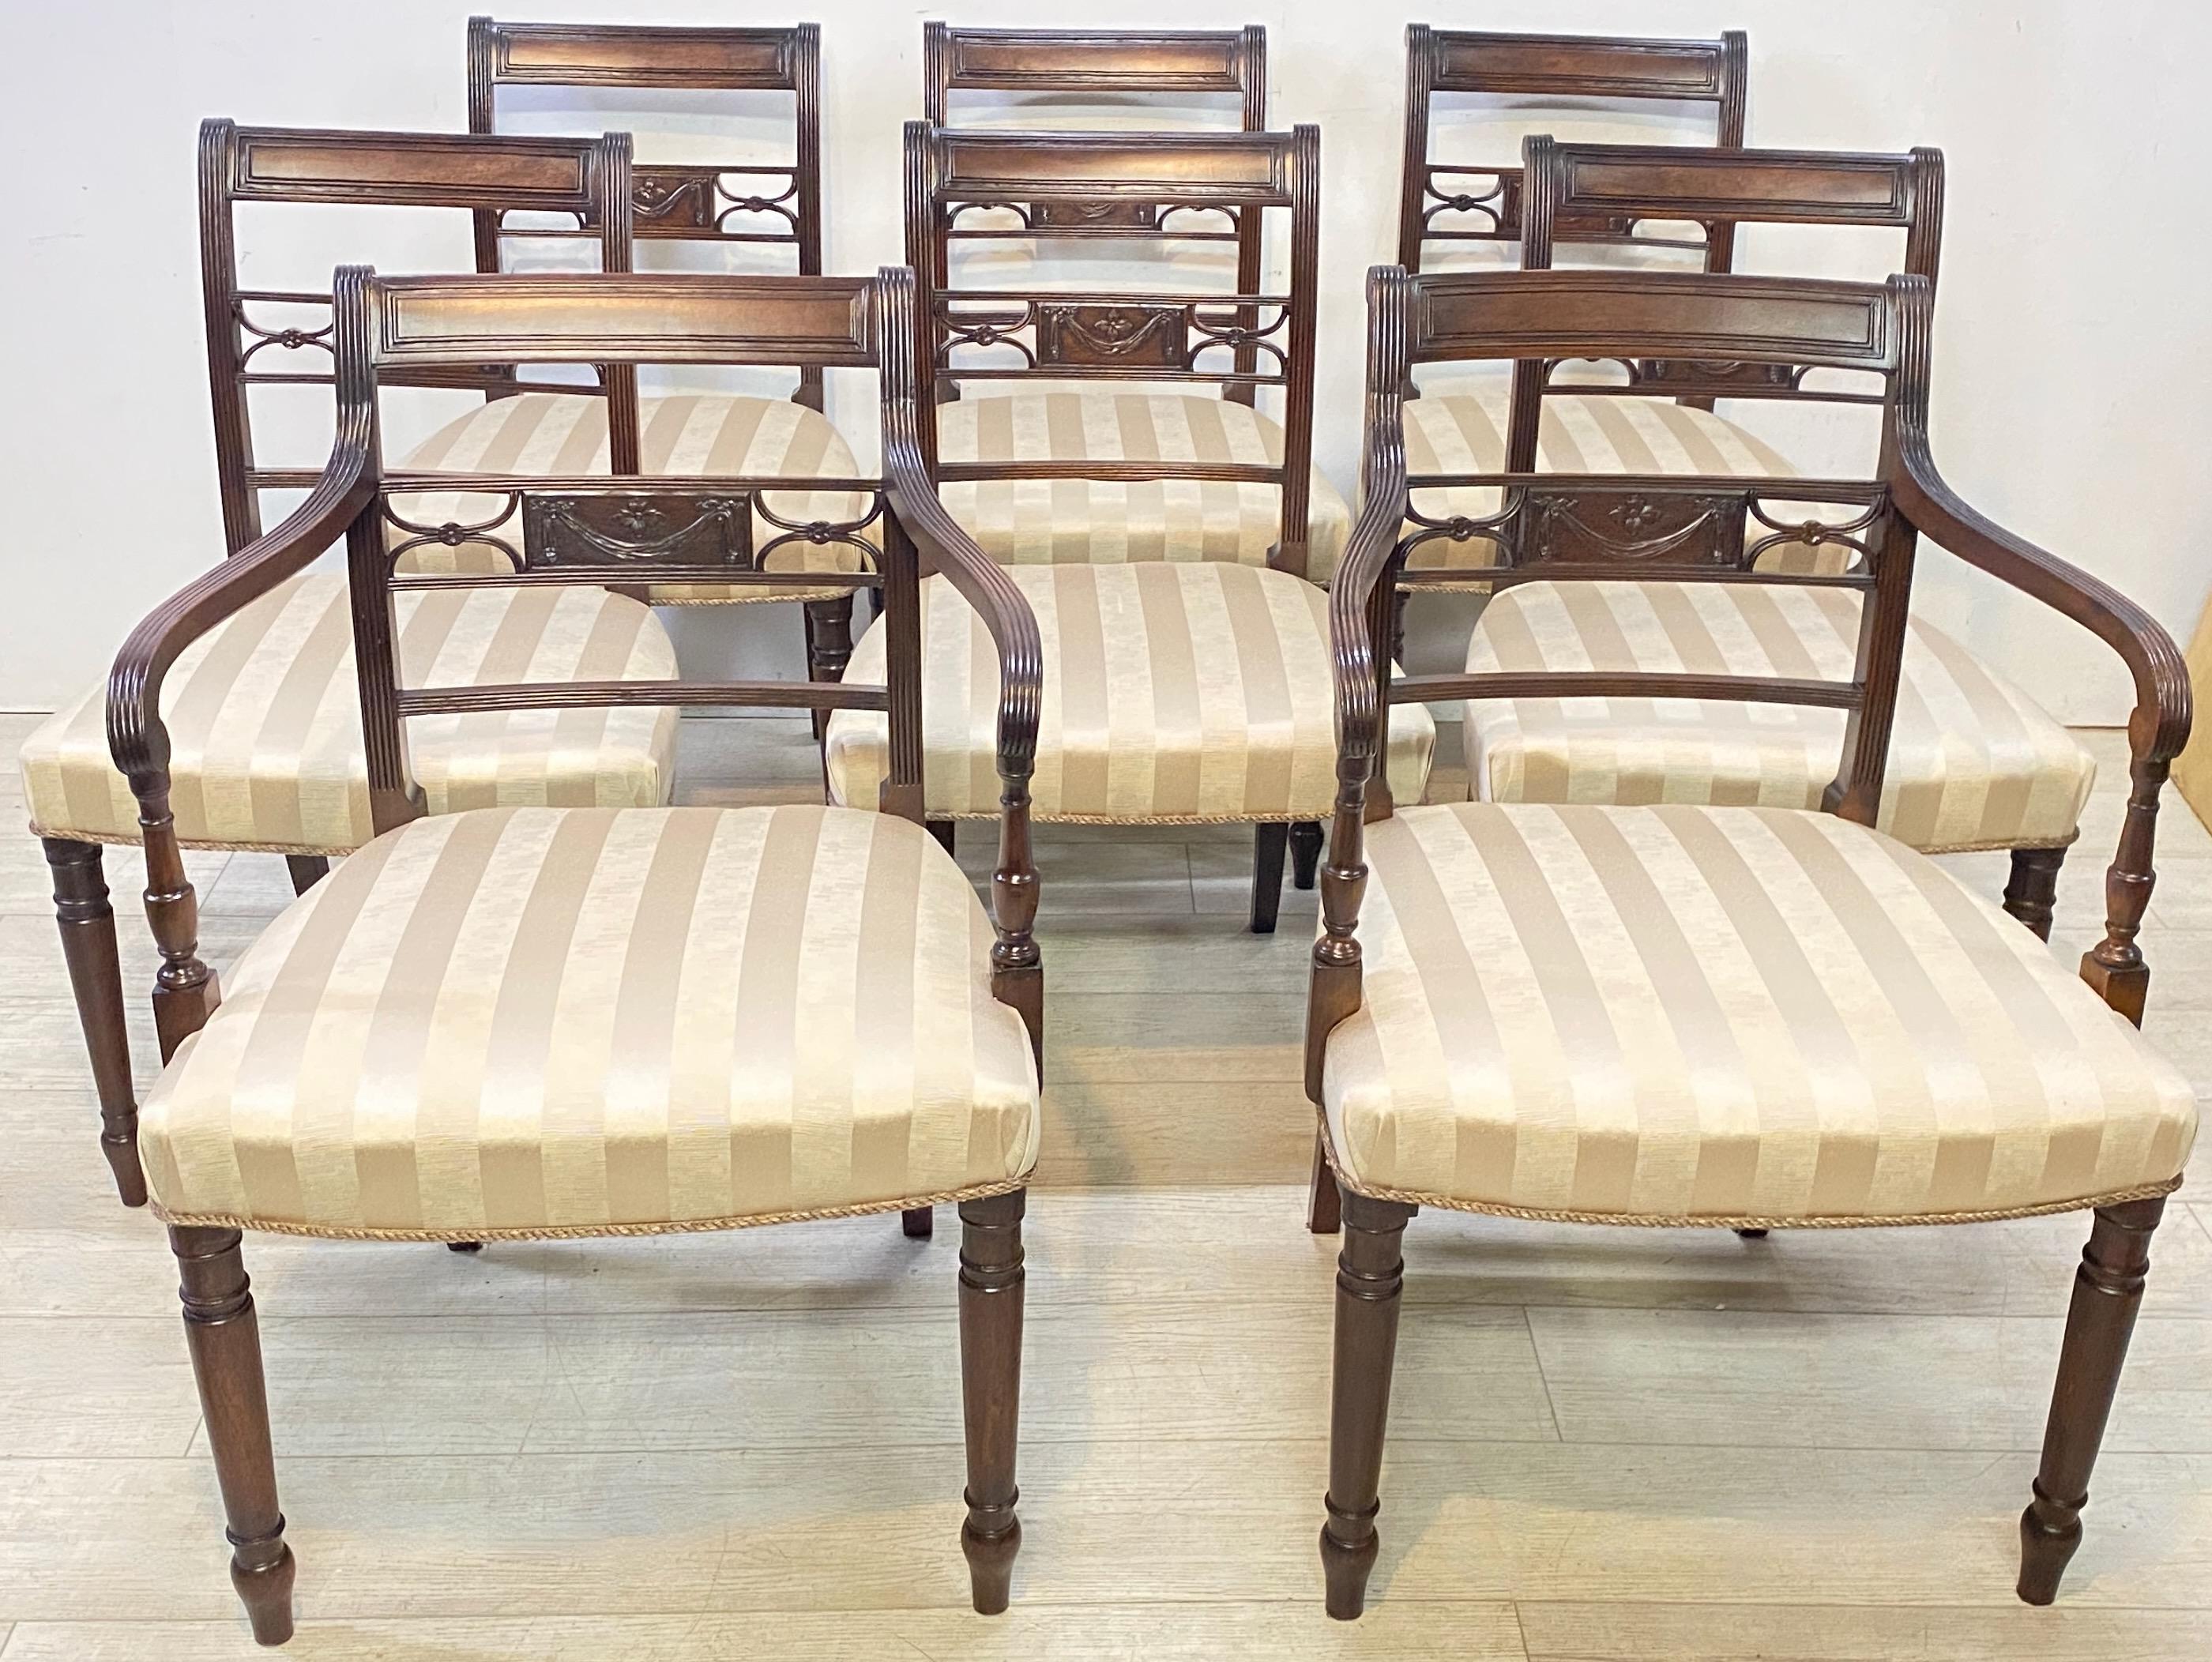 Set of 8 English George III Mahogany Dining Chairs, Early 19th Century For Sale 5